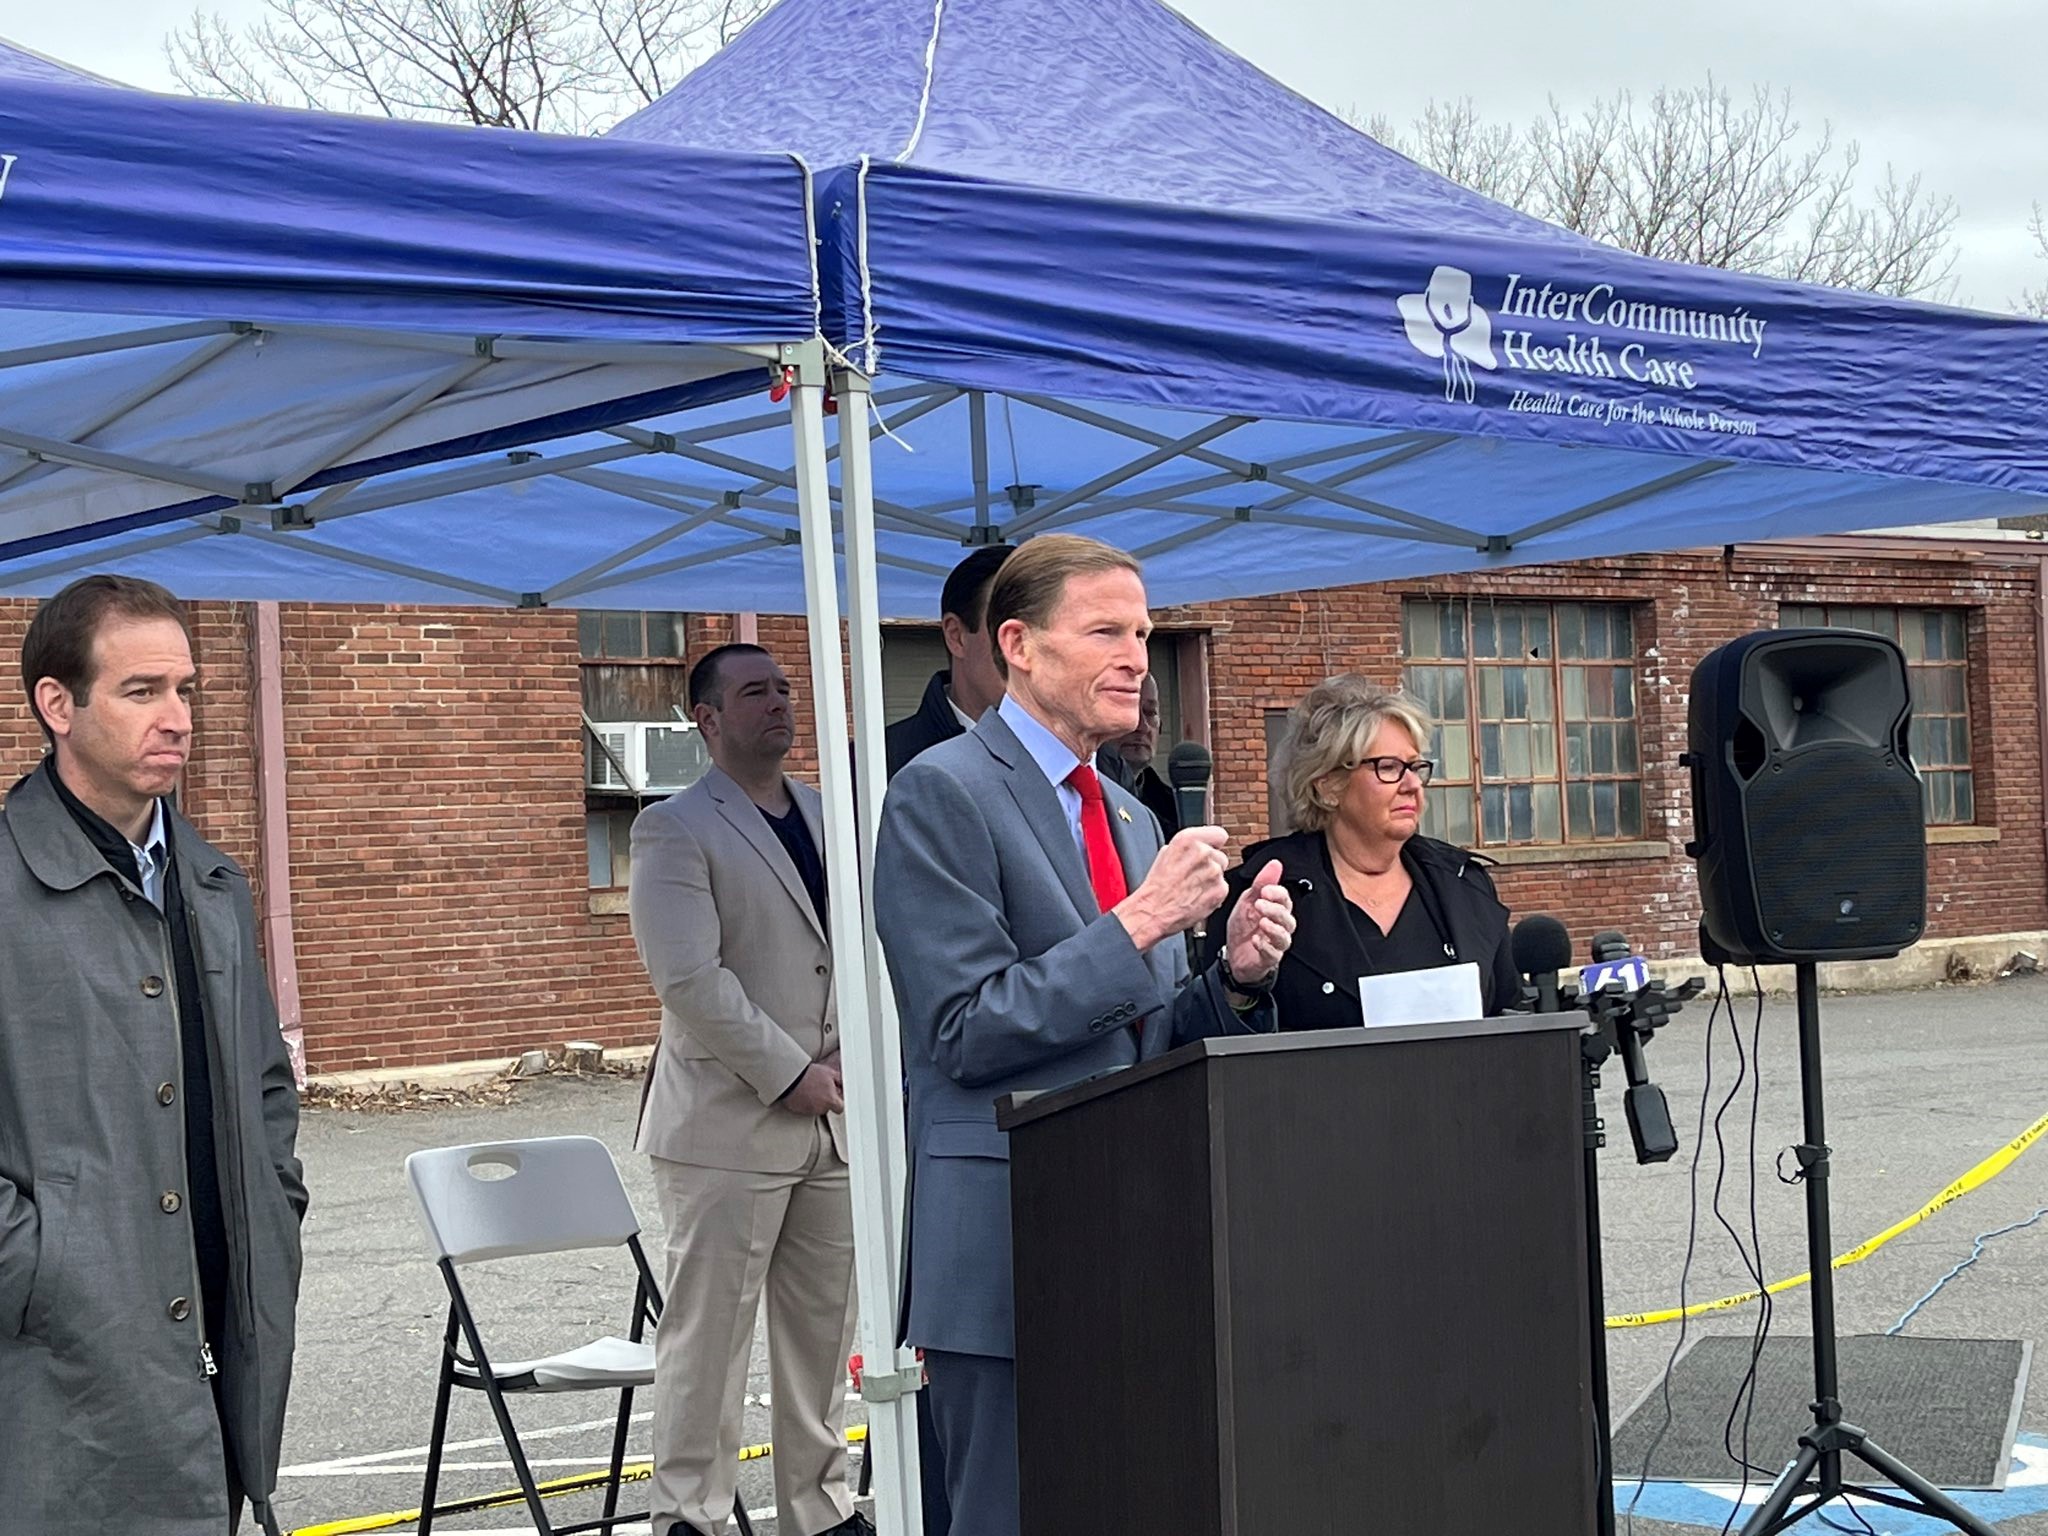 Blumenthal and Murphy announced $1.8 million in federal funding for Intercommunity to expand their mental health and primary care services in Hartford to approximately 2,000 new low-income, uninsured or under-insured patients. 